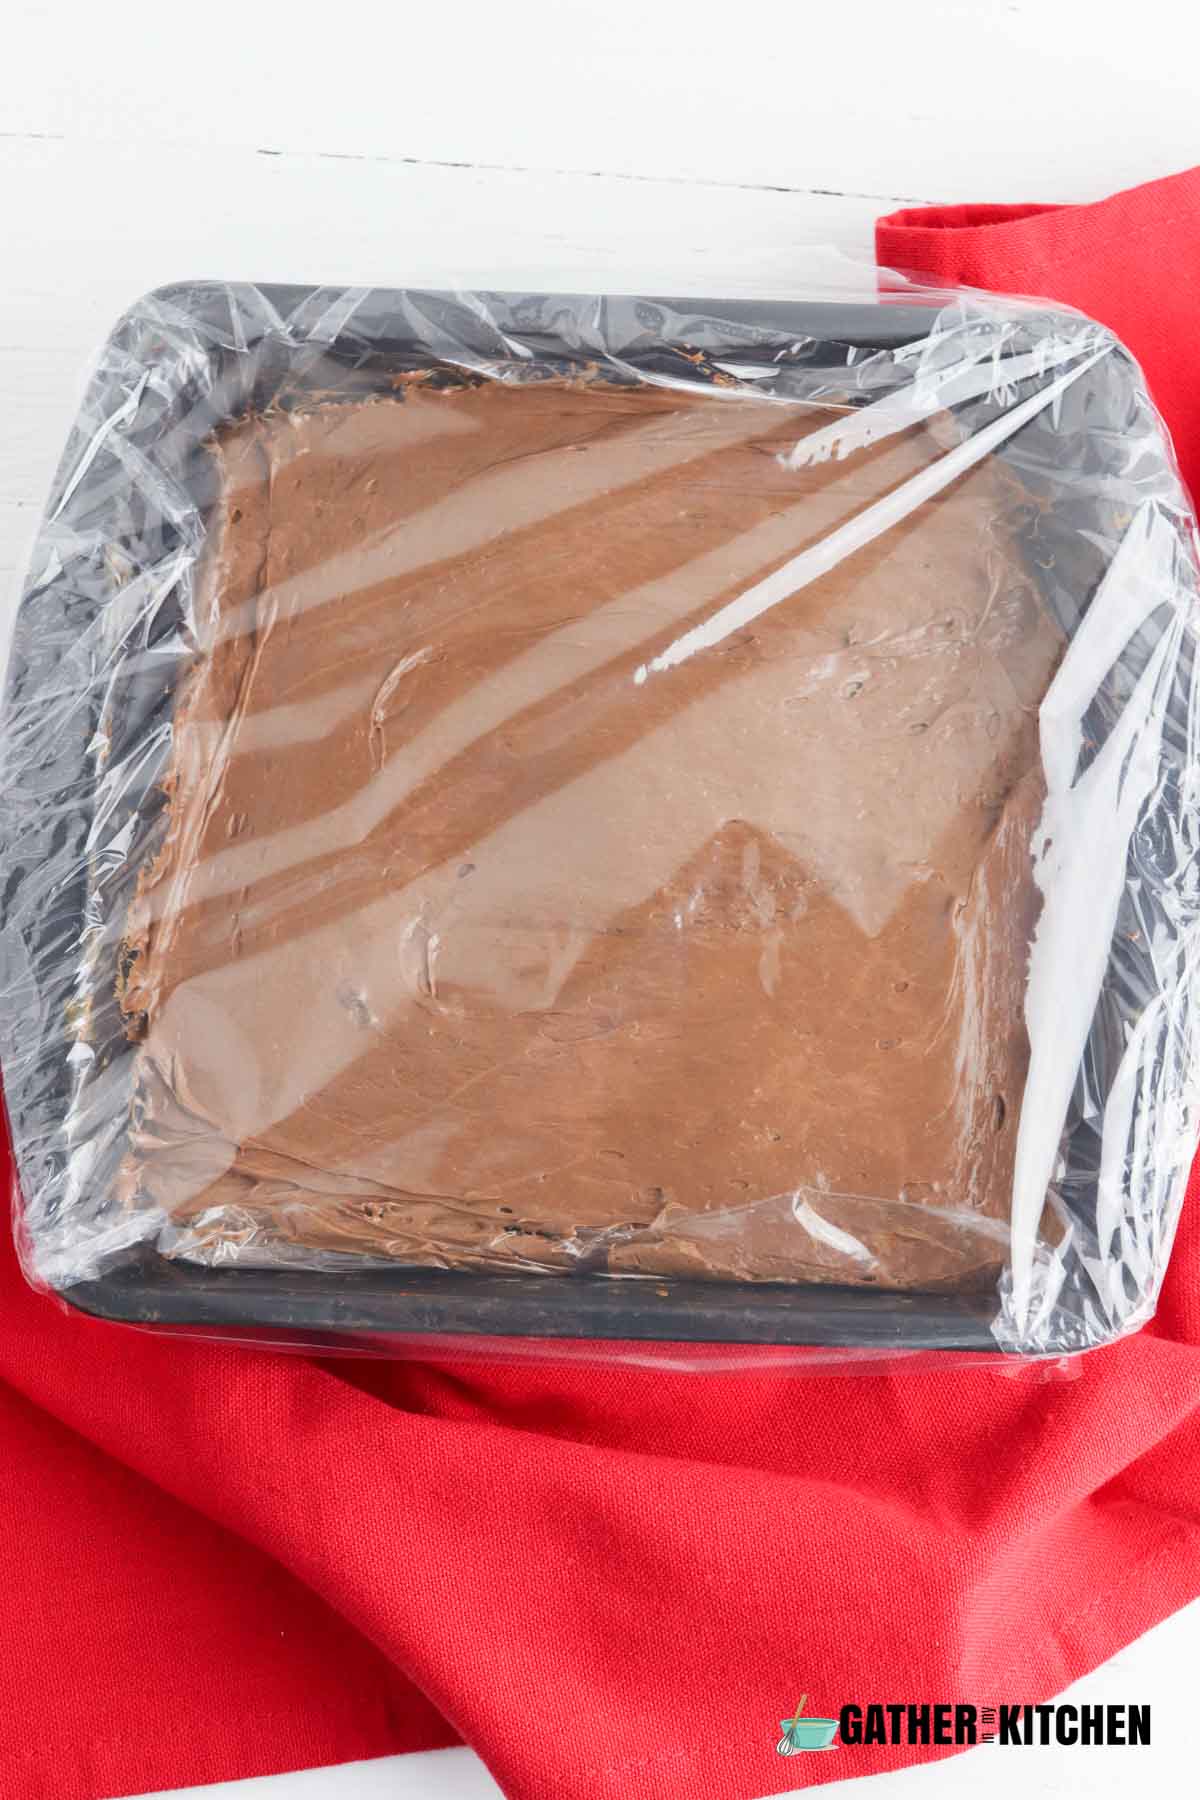 Melted chocolate in a baking pan covered in plastic wrap.